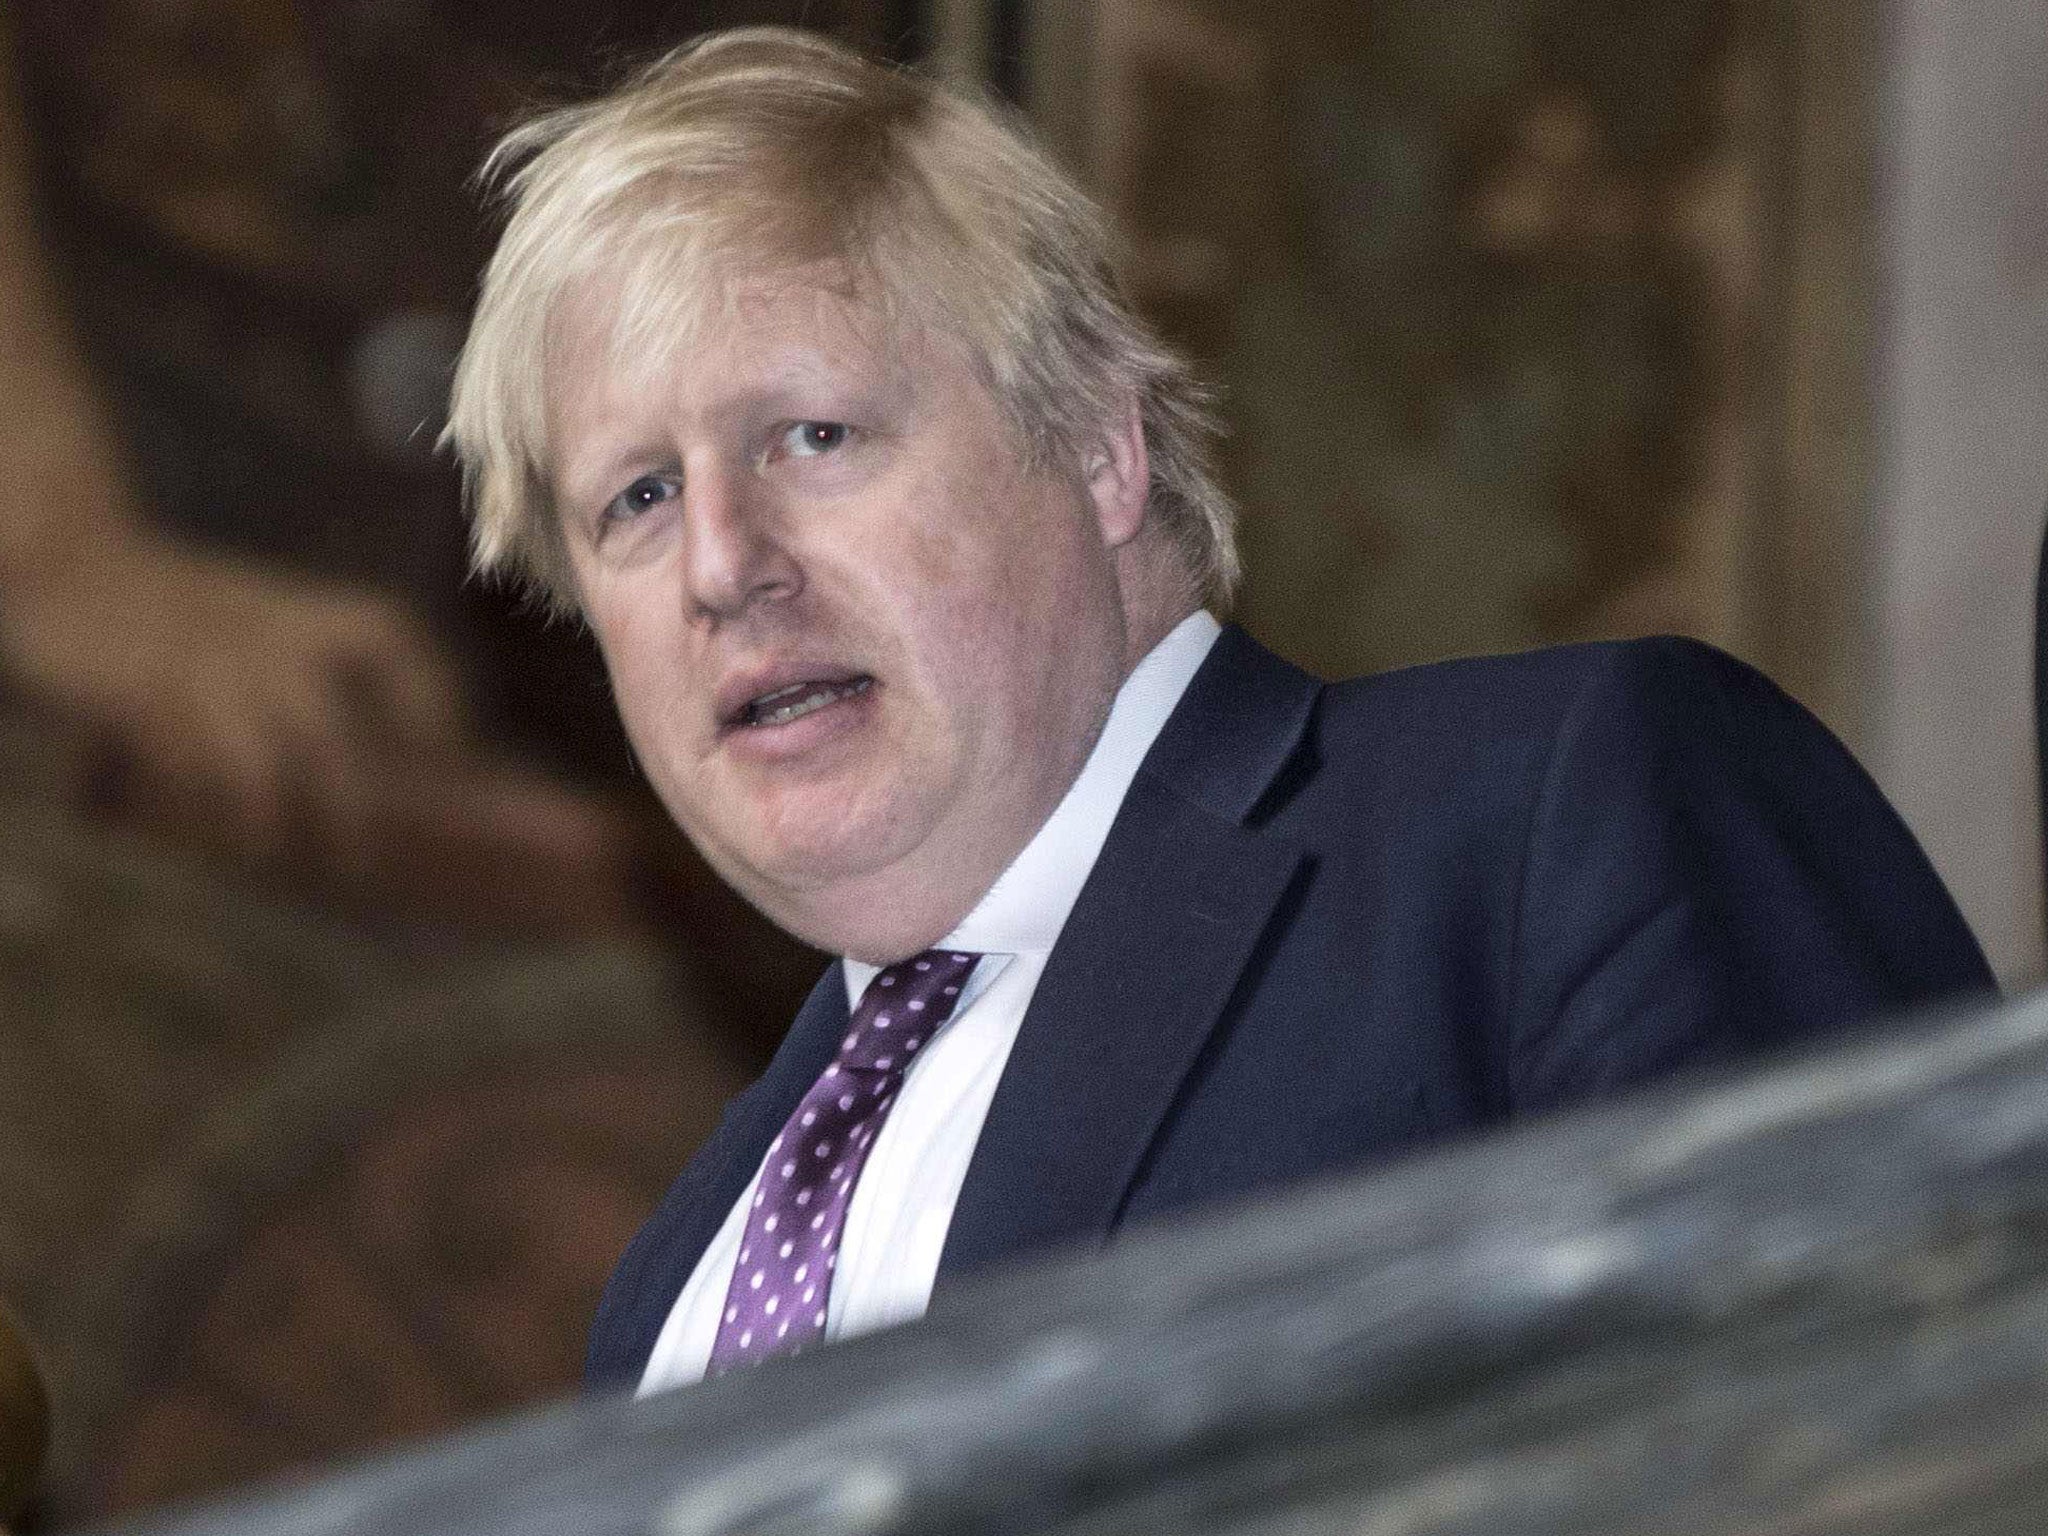 Foreign Secretary Boris Johnson at the Foreign Office in London on April 20, 2017